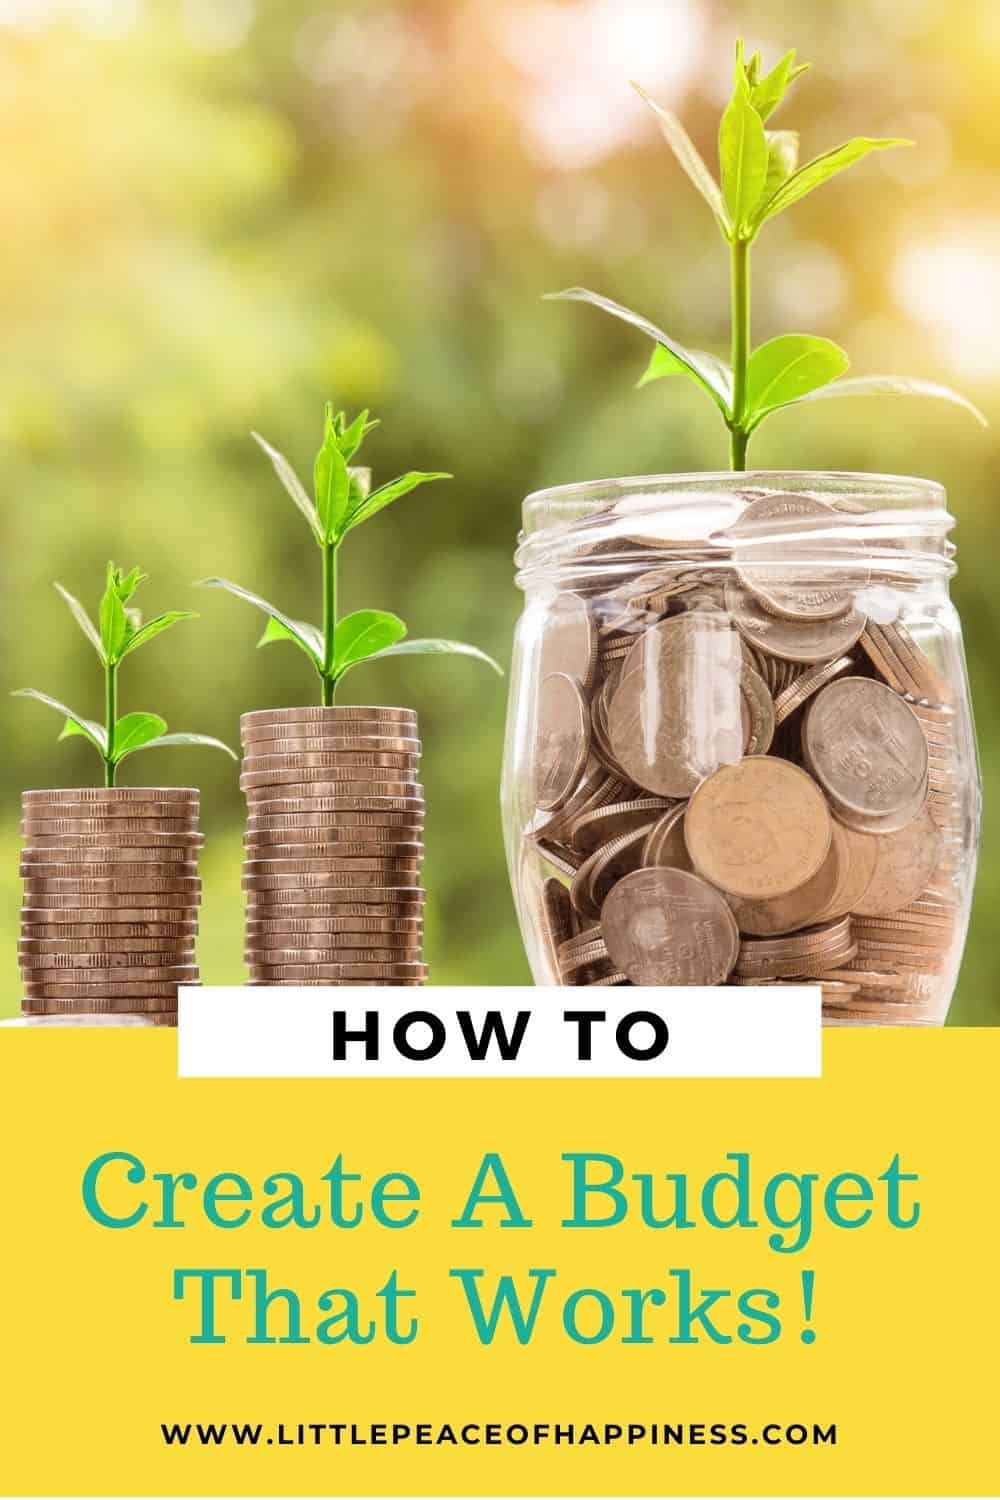 Learn to Budget